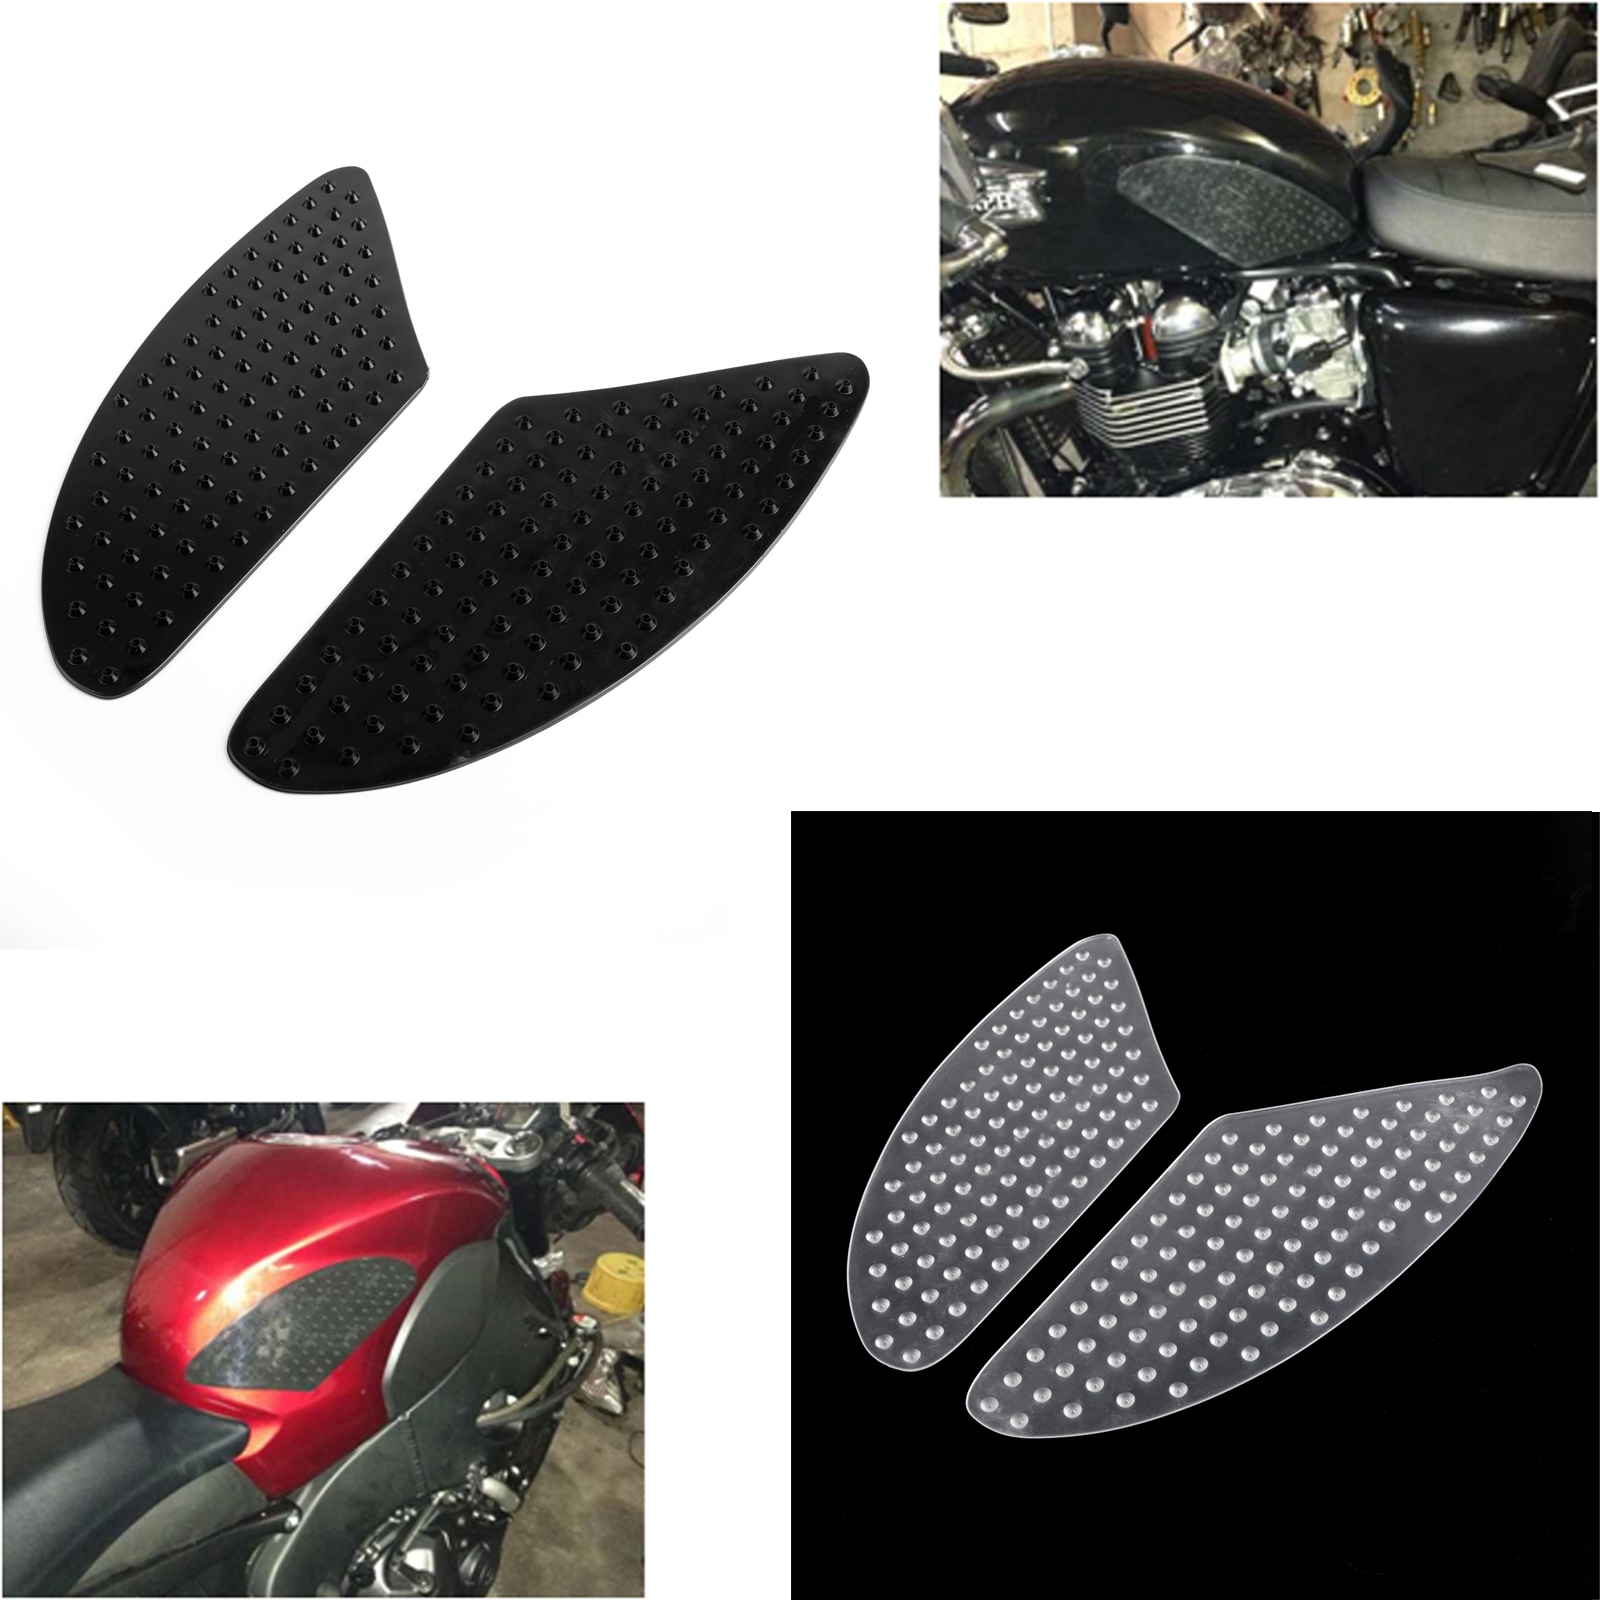 YF Z1000 Tank Grip Traction Pad Side Gas Knee Protection For Kawasaki ZX6R